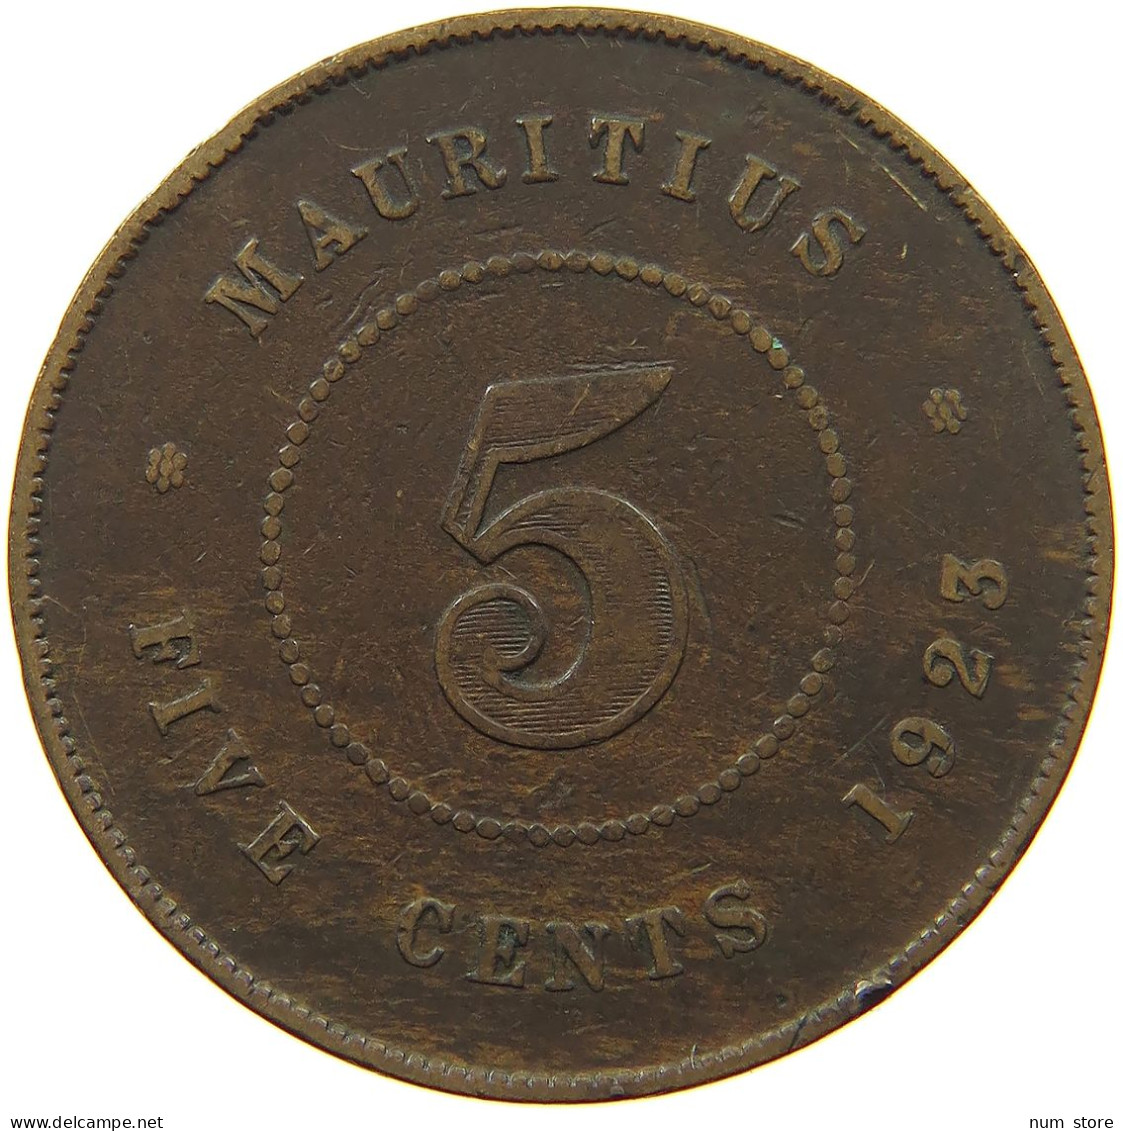 MAURITIUS 5 CENTS 1923 George V. (1910-1936) #s075 0709 - Maurice